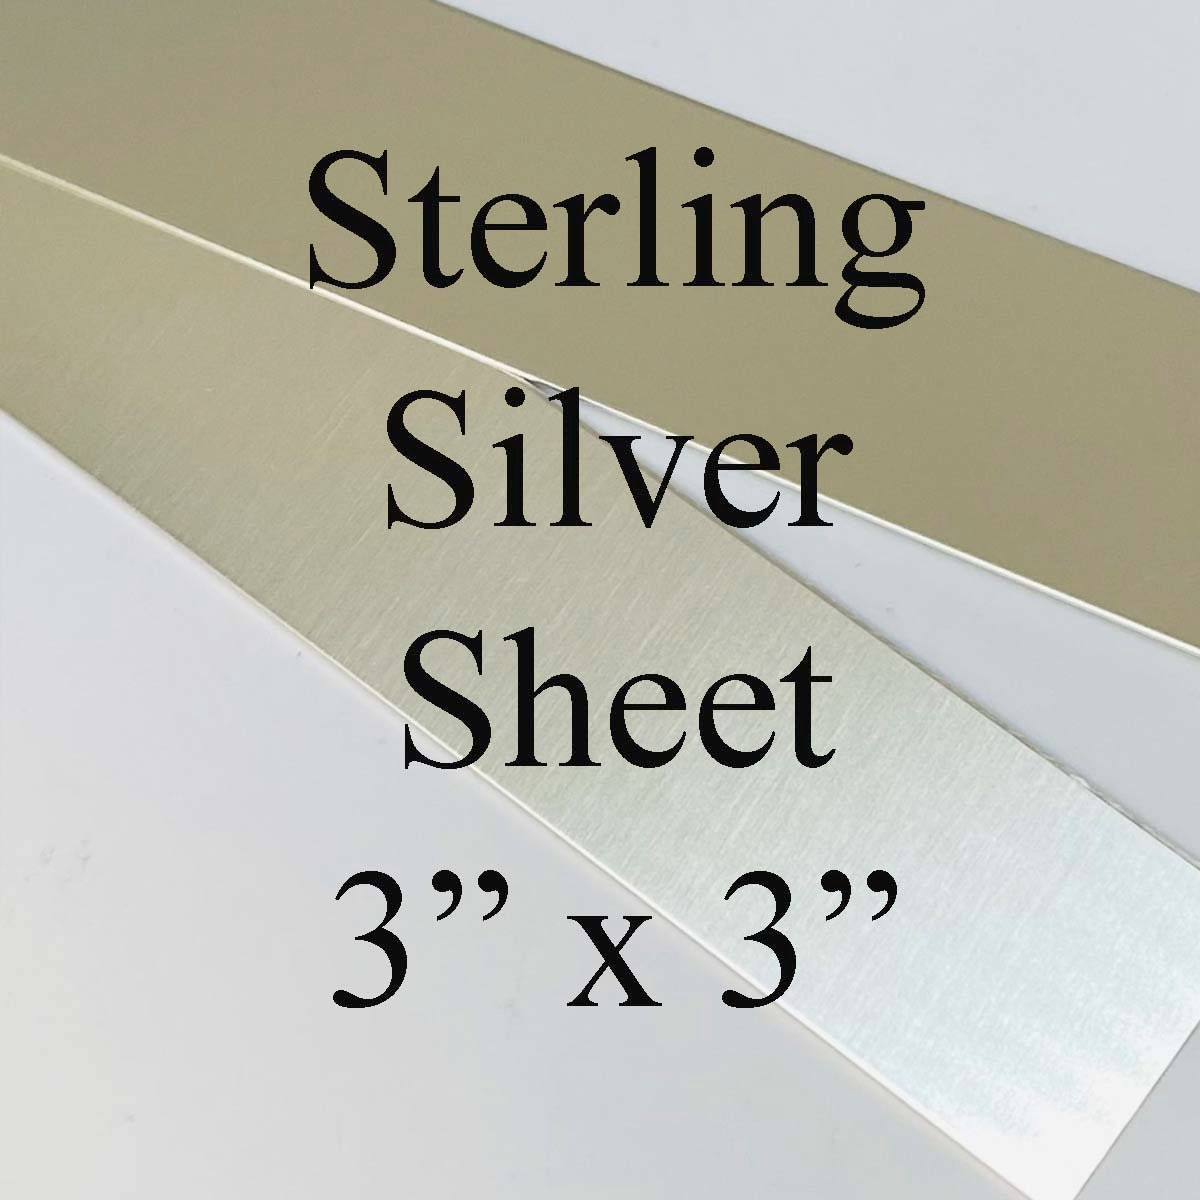 Bedrock Jewelry M6A0QXG 6x1 Solid Sterling.925 Silver Sheet, 28 Gauge Dead Soft, Made in USA